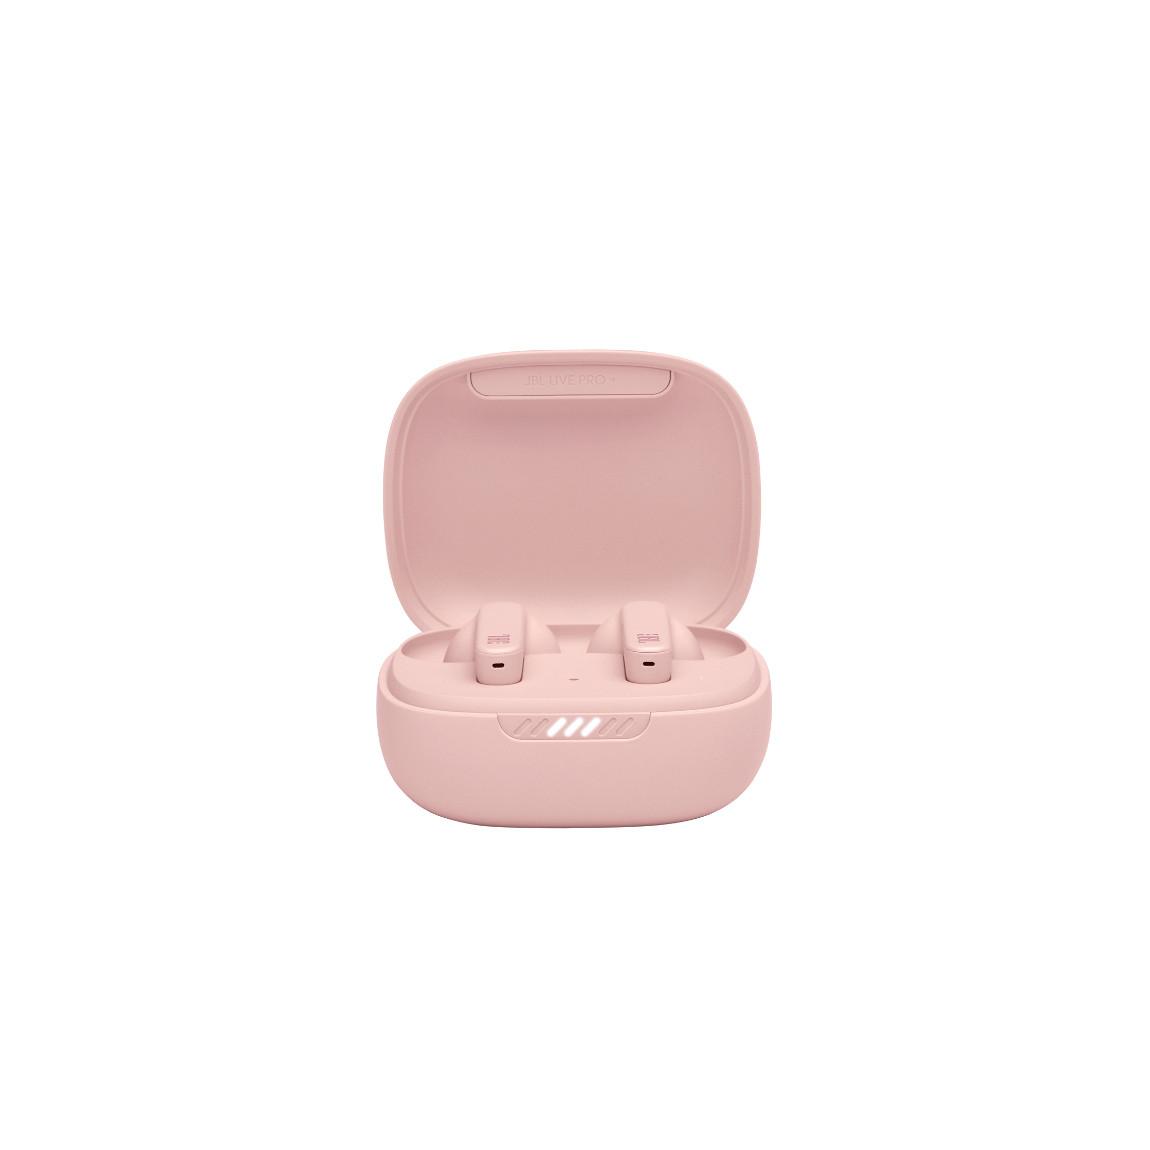 JBL Live Pro+ - Noise-Cancelling Earbuds - pink_offenes Case mit Earbuds2